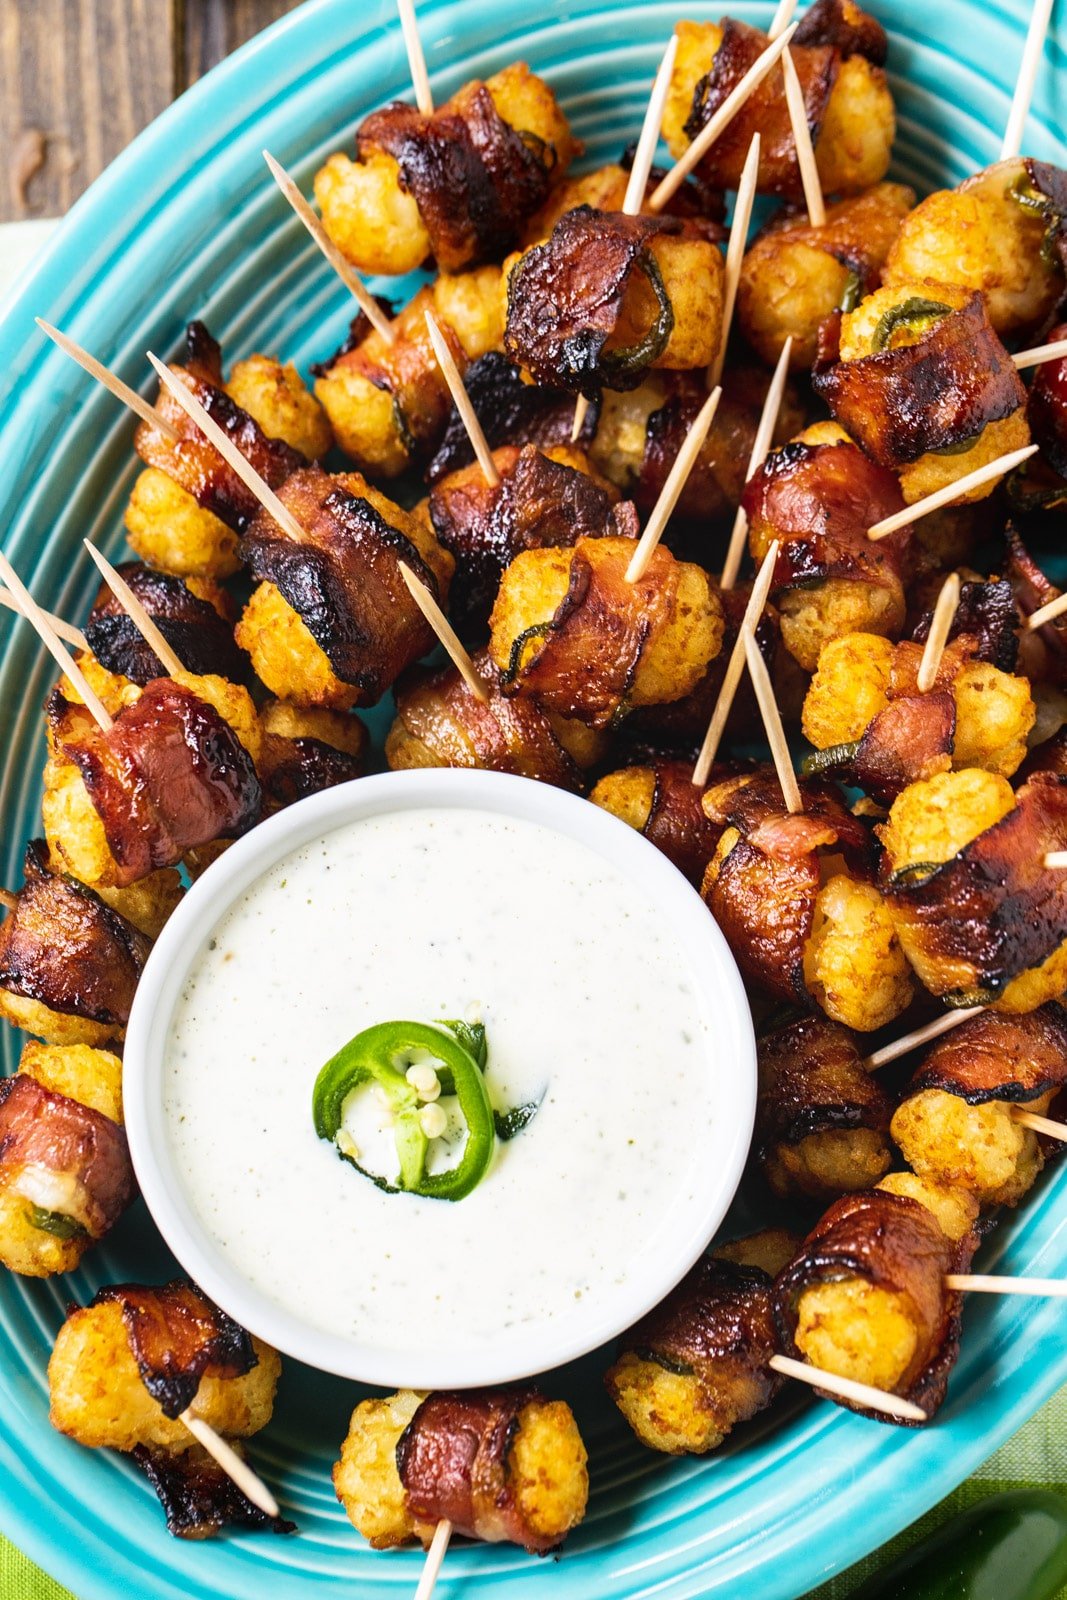 Jalapeno Bacon Tater Tots with bowl of dipping sauce on serving plate.